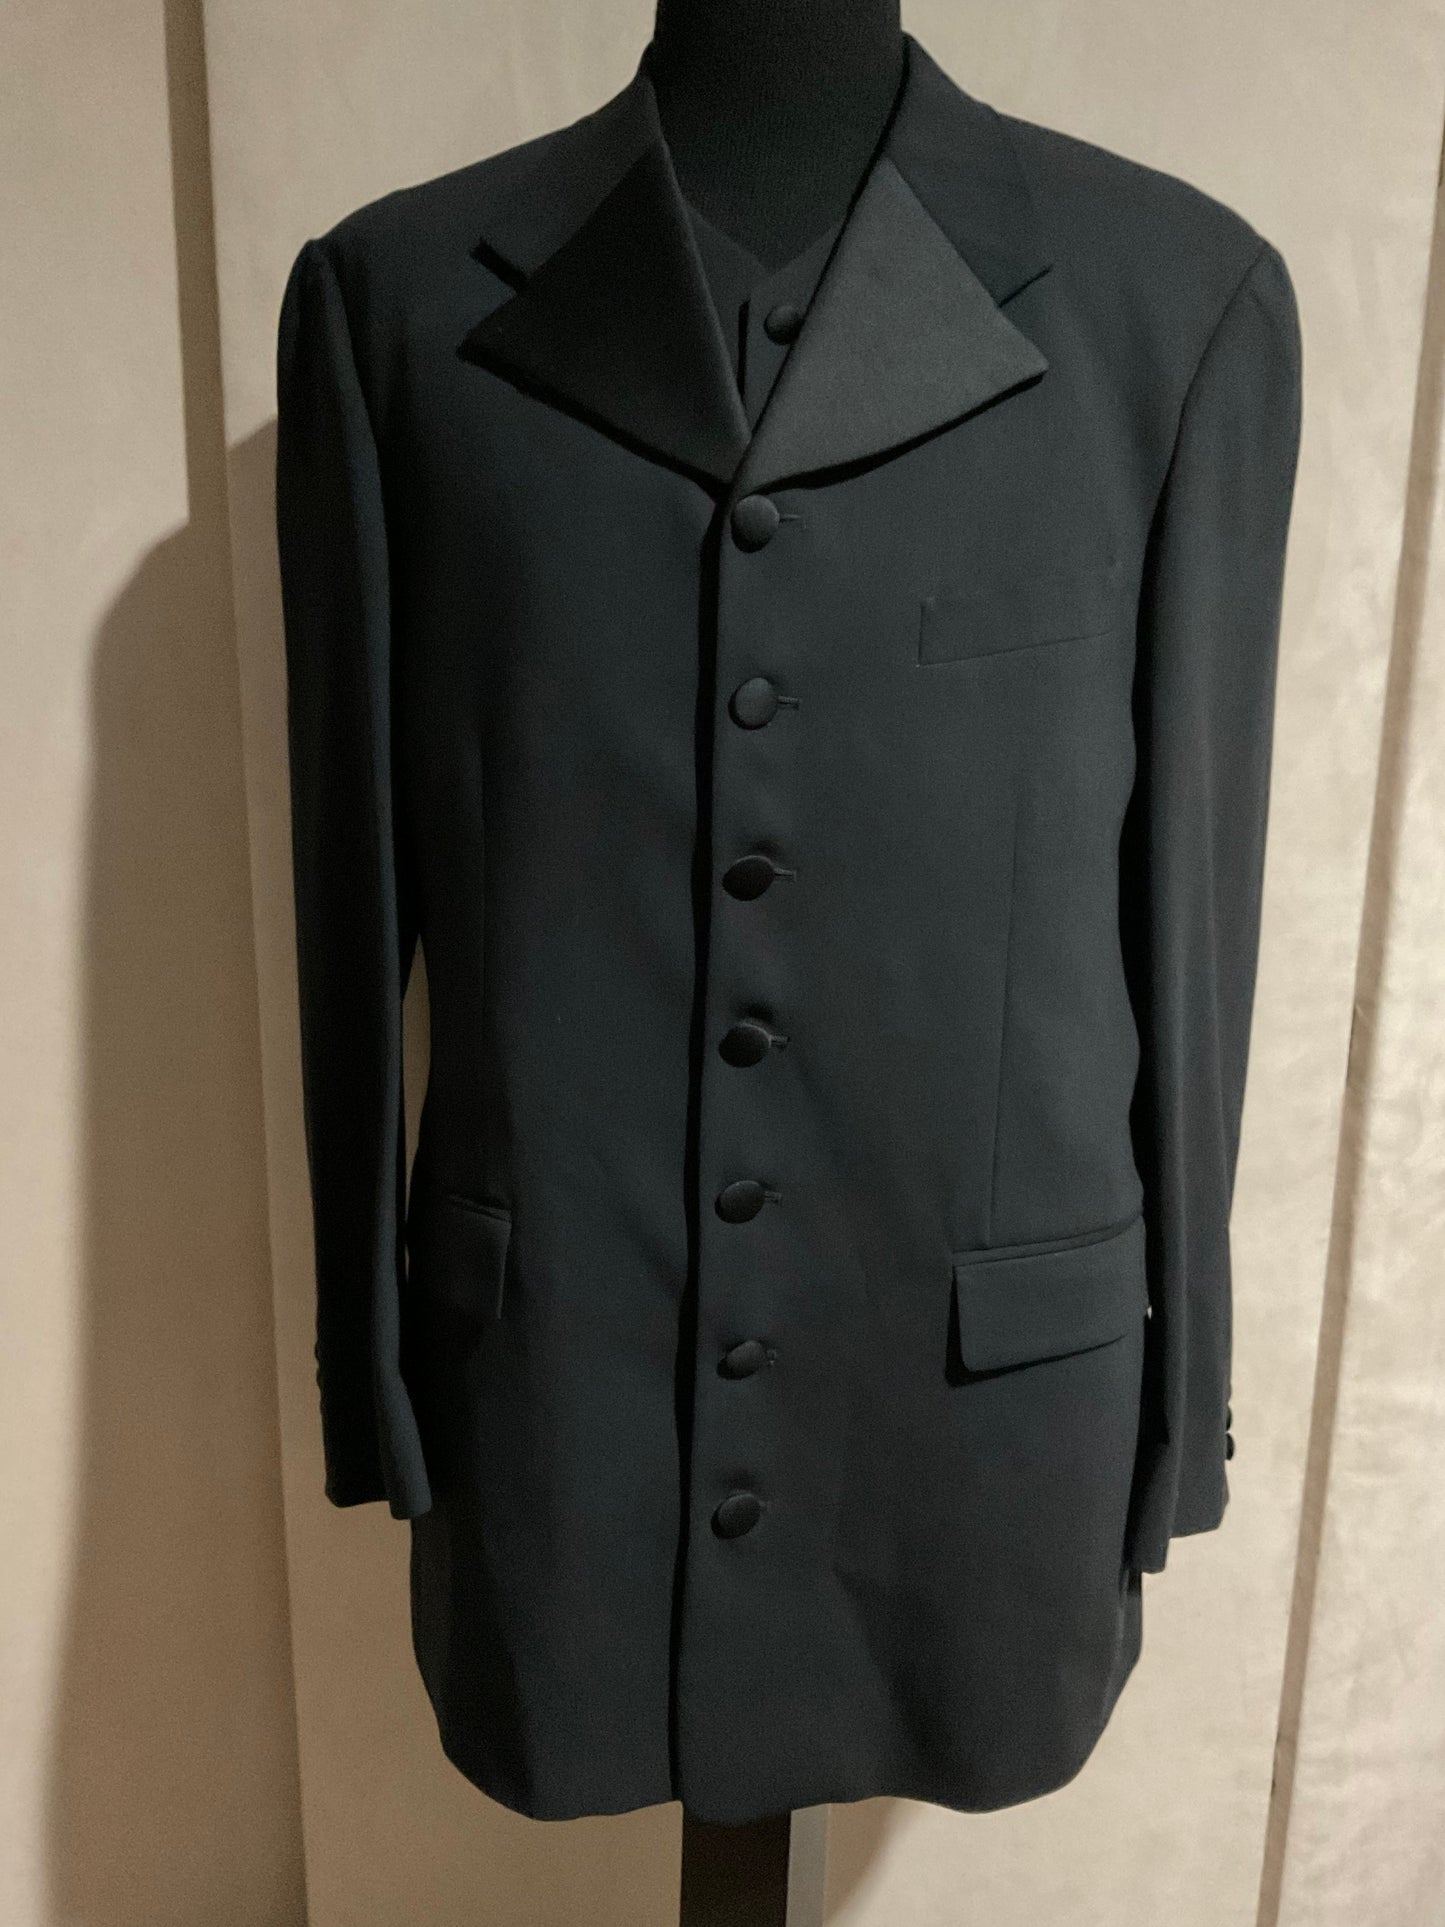 R P TUXEDO & VEST / 7 BUTTON BLACK CREPE / NEW / 42 REG OR LONG / MADE IN ITALY